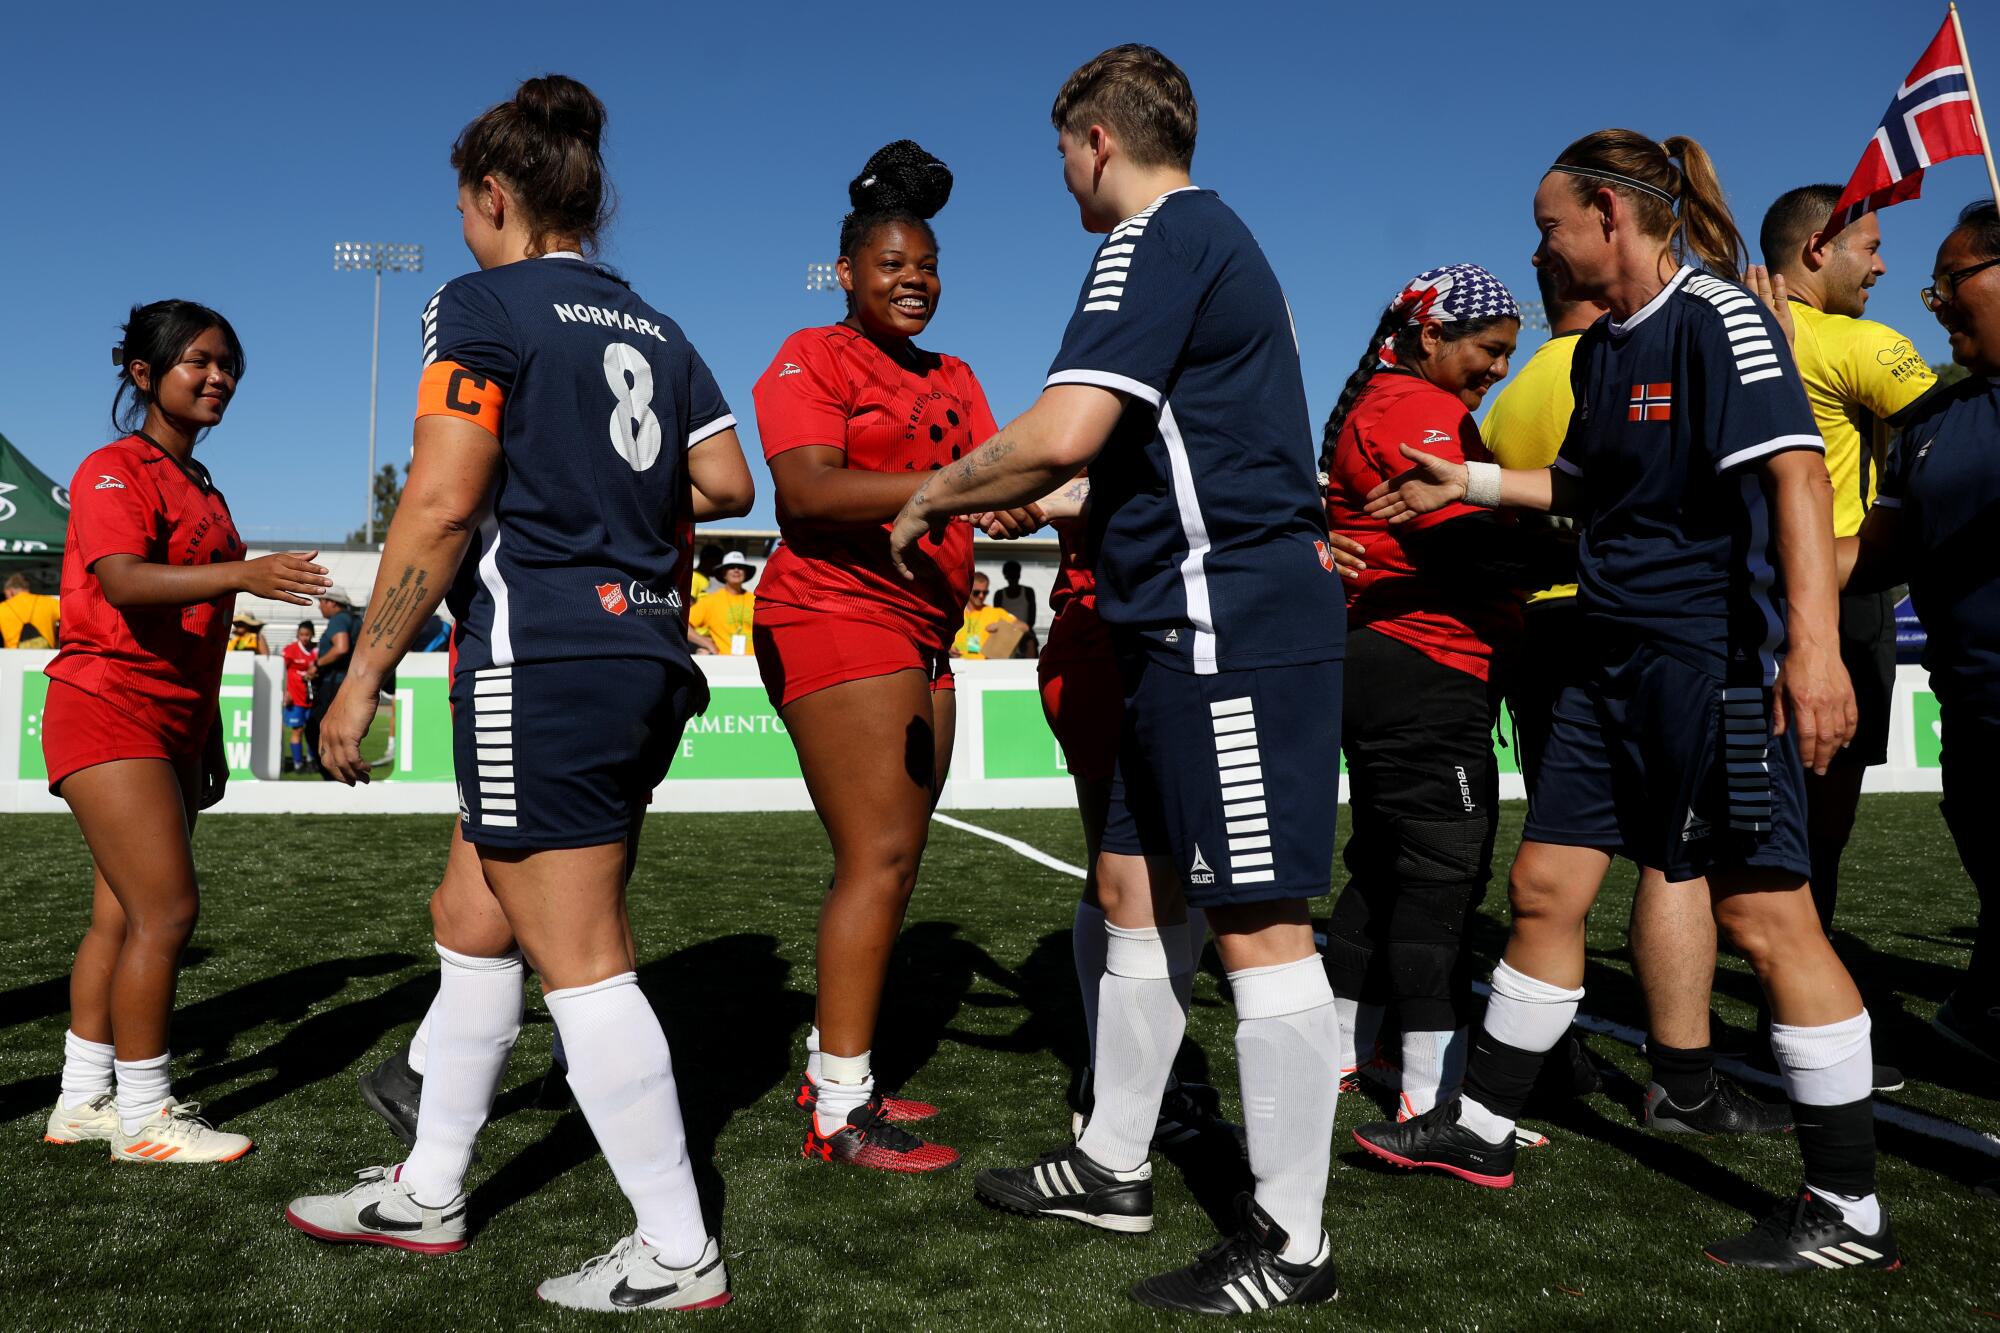 U.S. players shake hands with players representing Norway after a match at the Homeless World Cup on July 11.